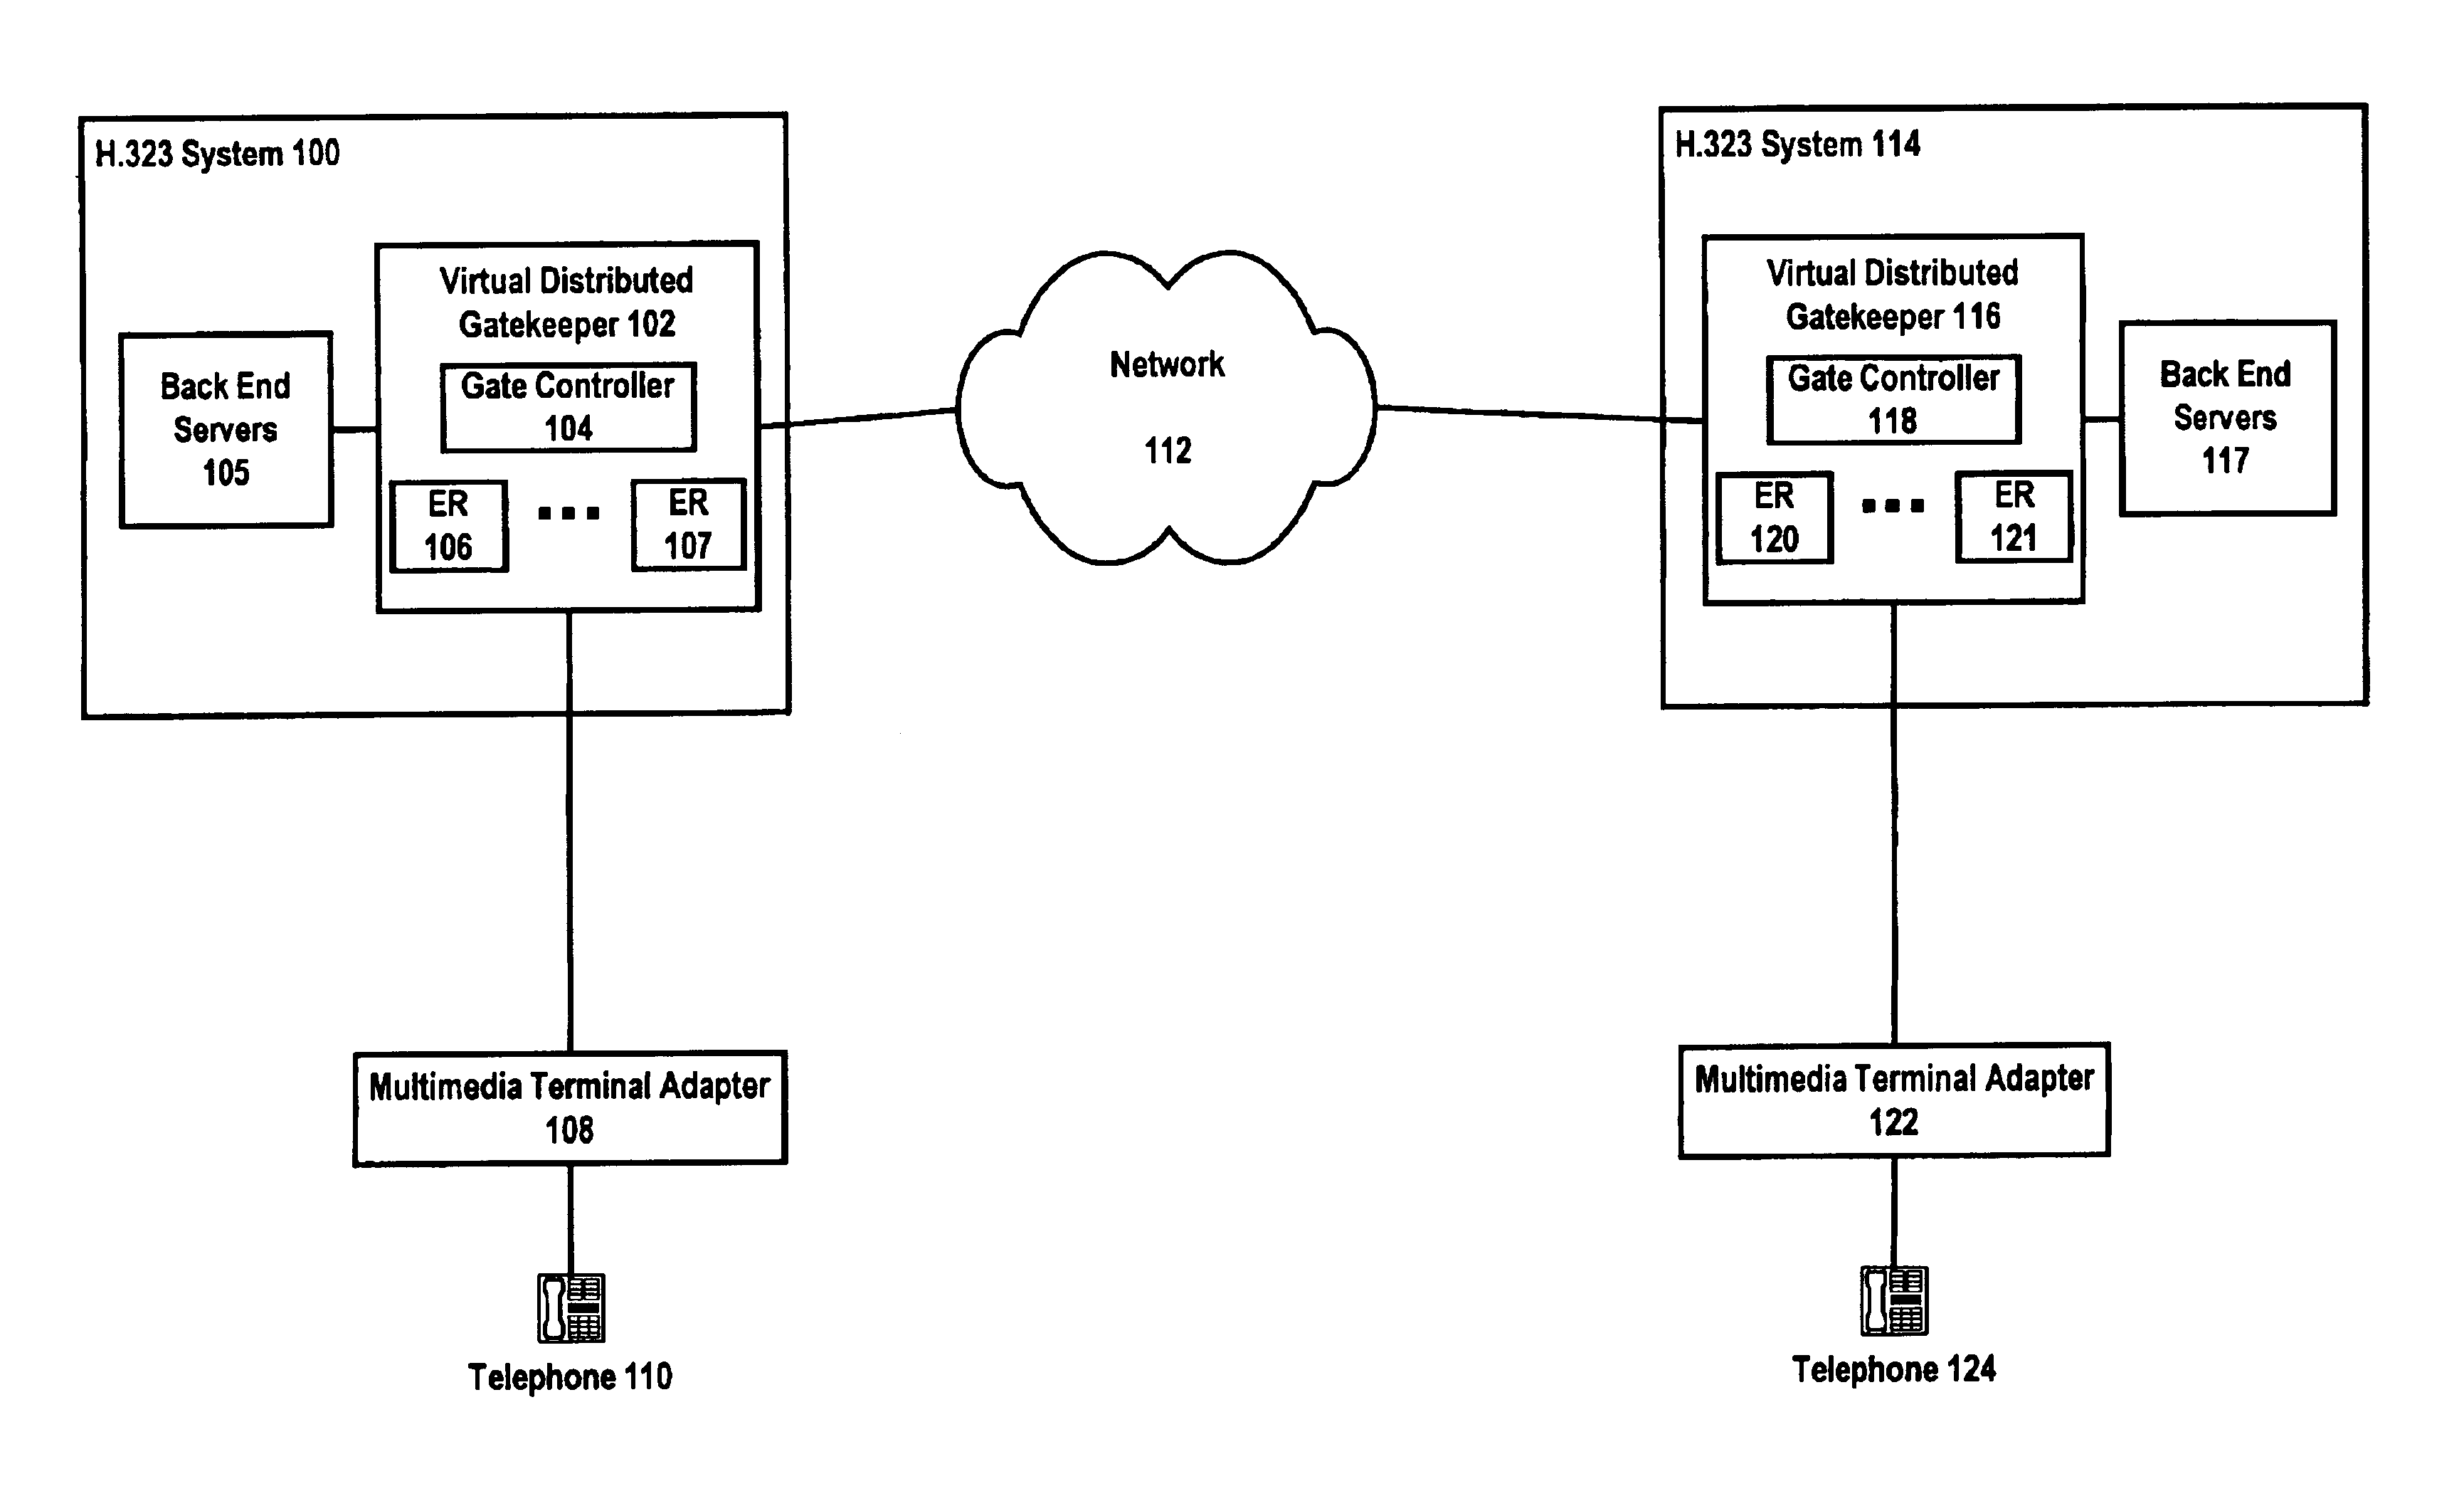 Method and apparatus for providing a virtual distributed gatekeeper in an H.323 system